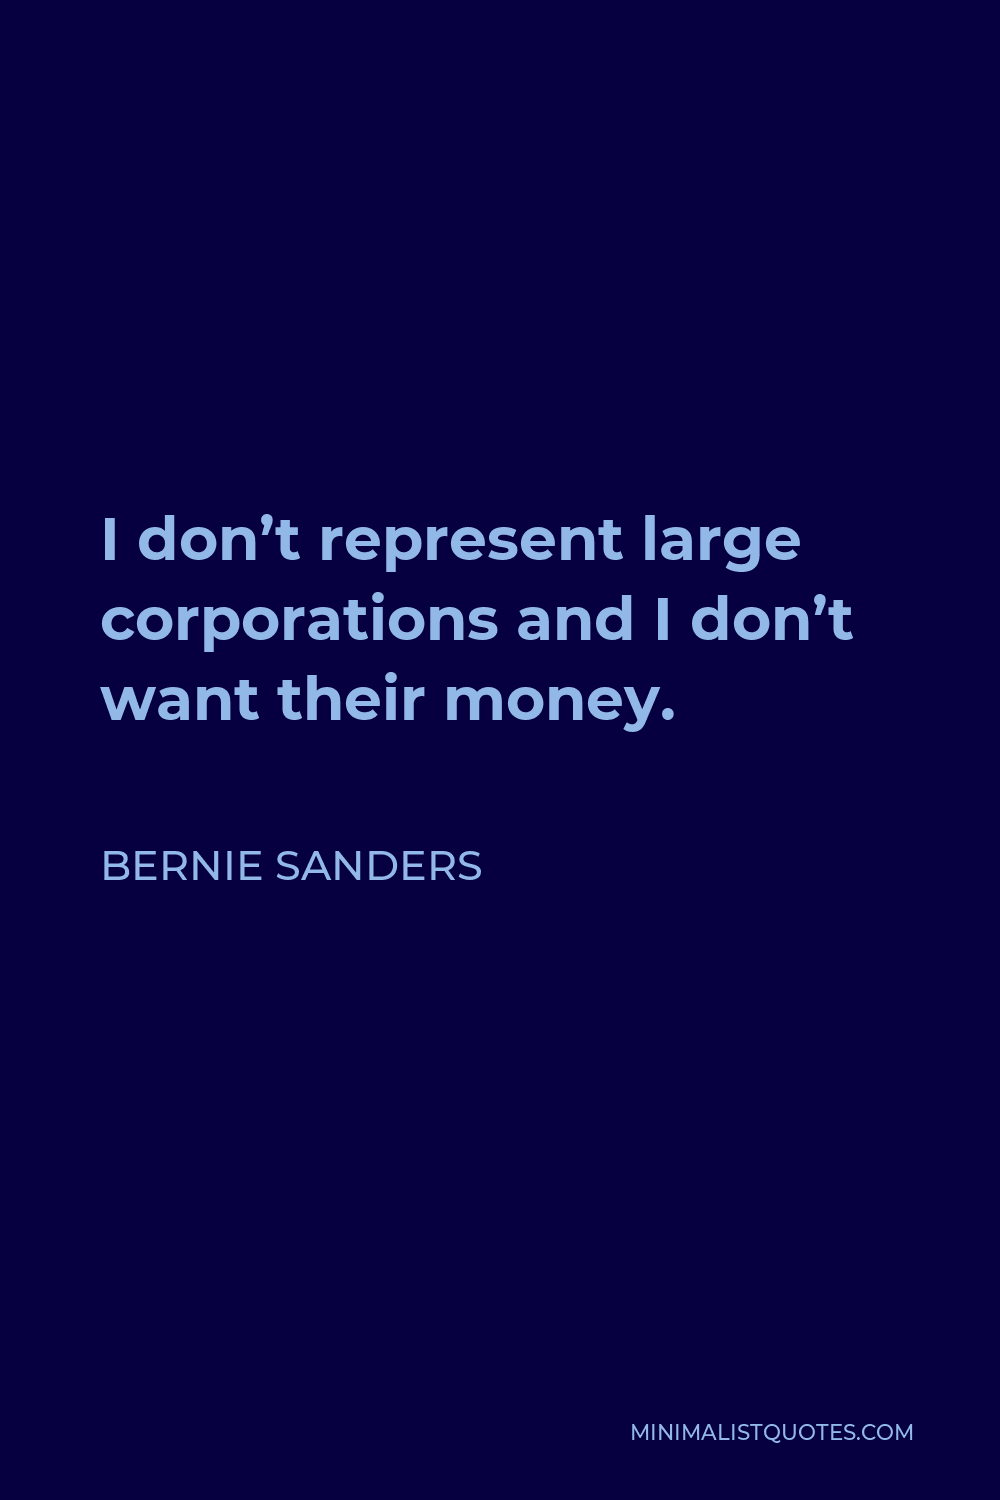 Bernie Sanders Quote - I don’t represent large corporations and I don’t want their money.